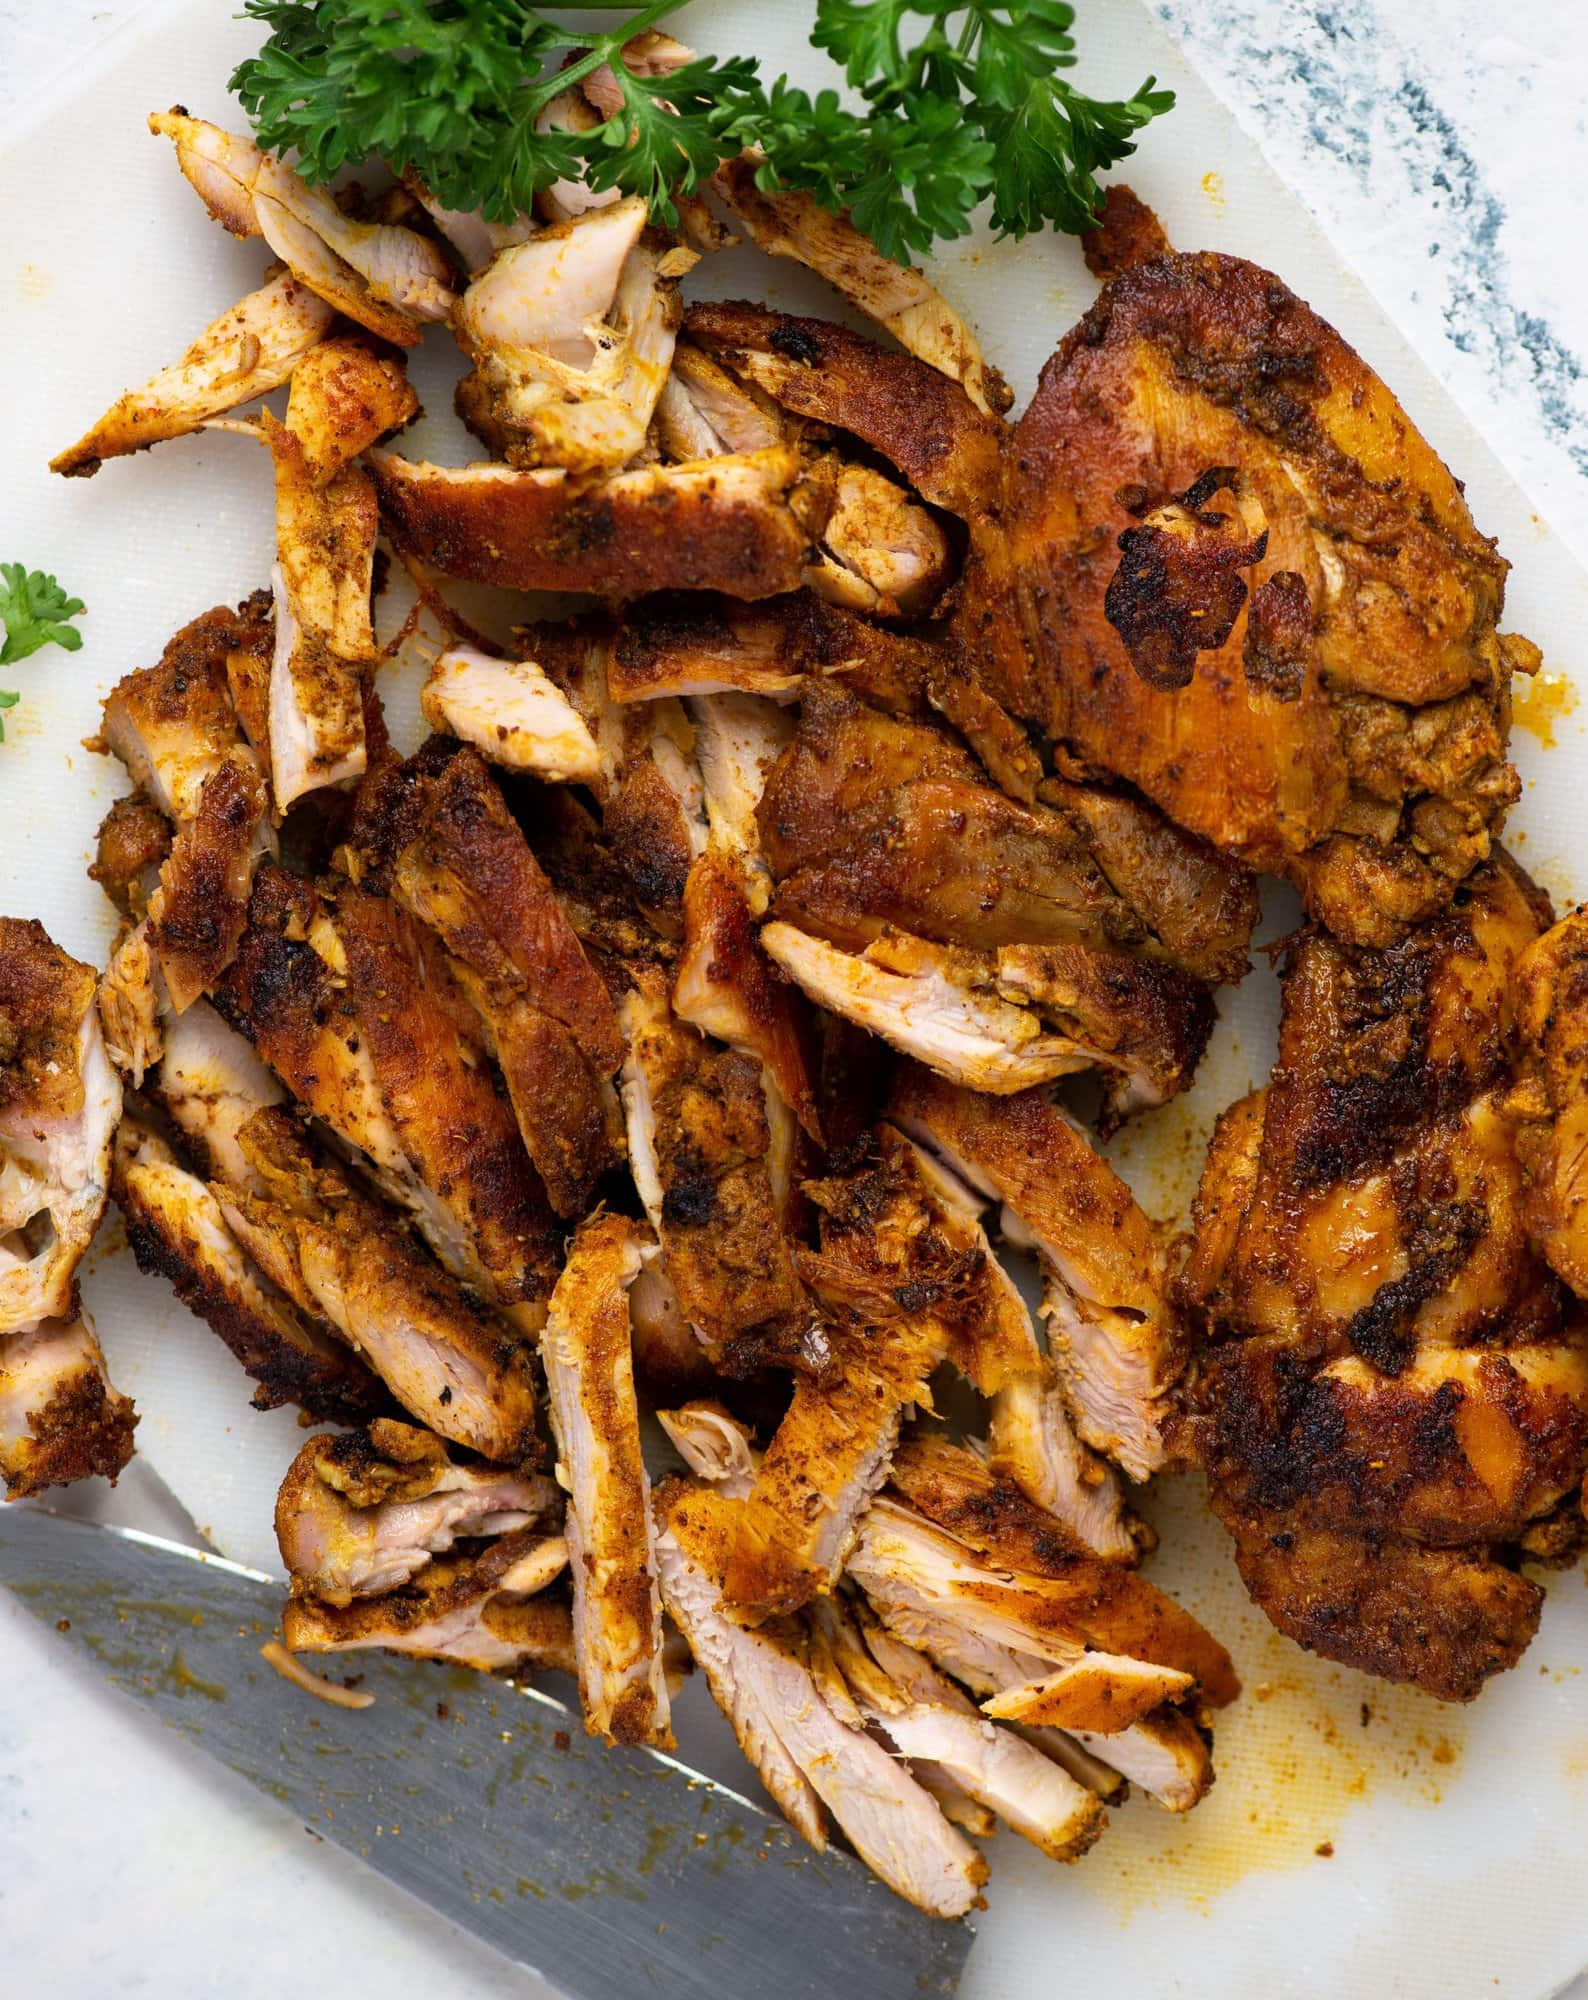 Chicken thigh grilled with spices and cut into thin pieces to be added as stuffing chicken shawarma.